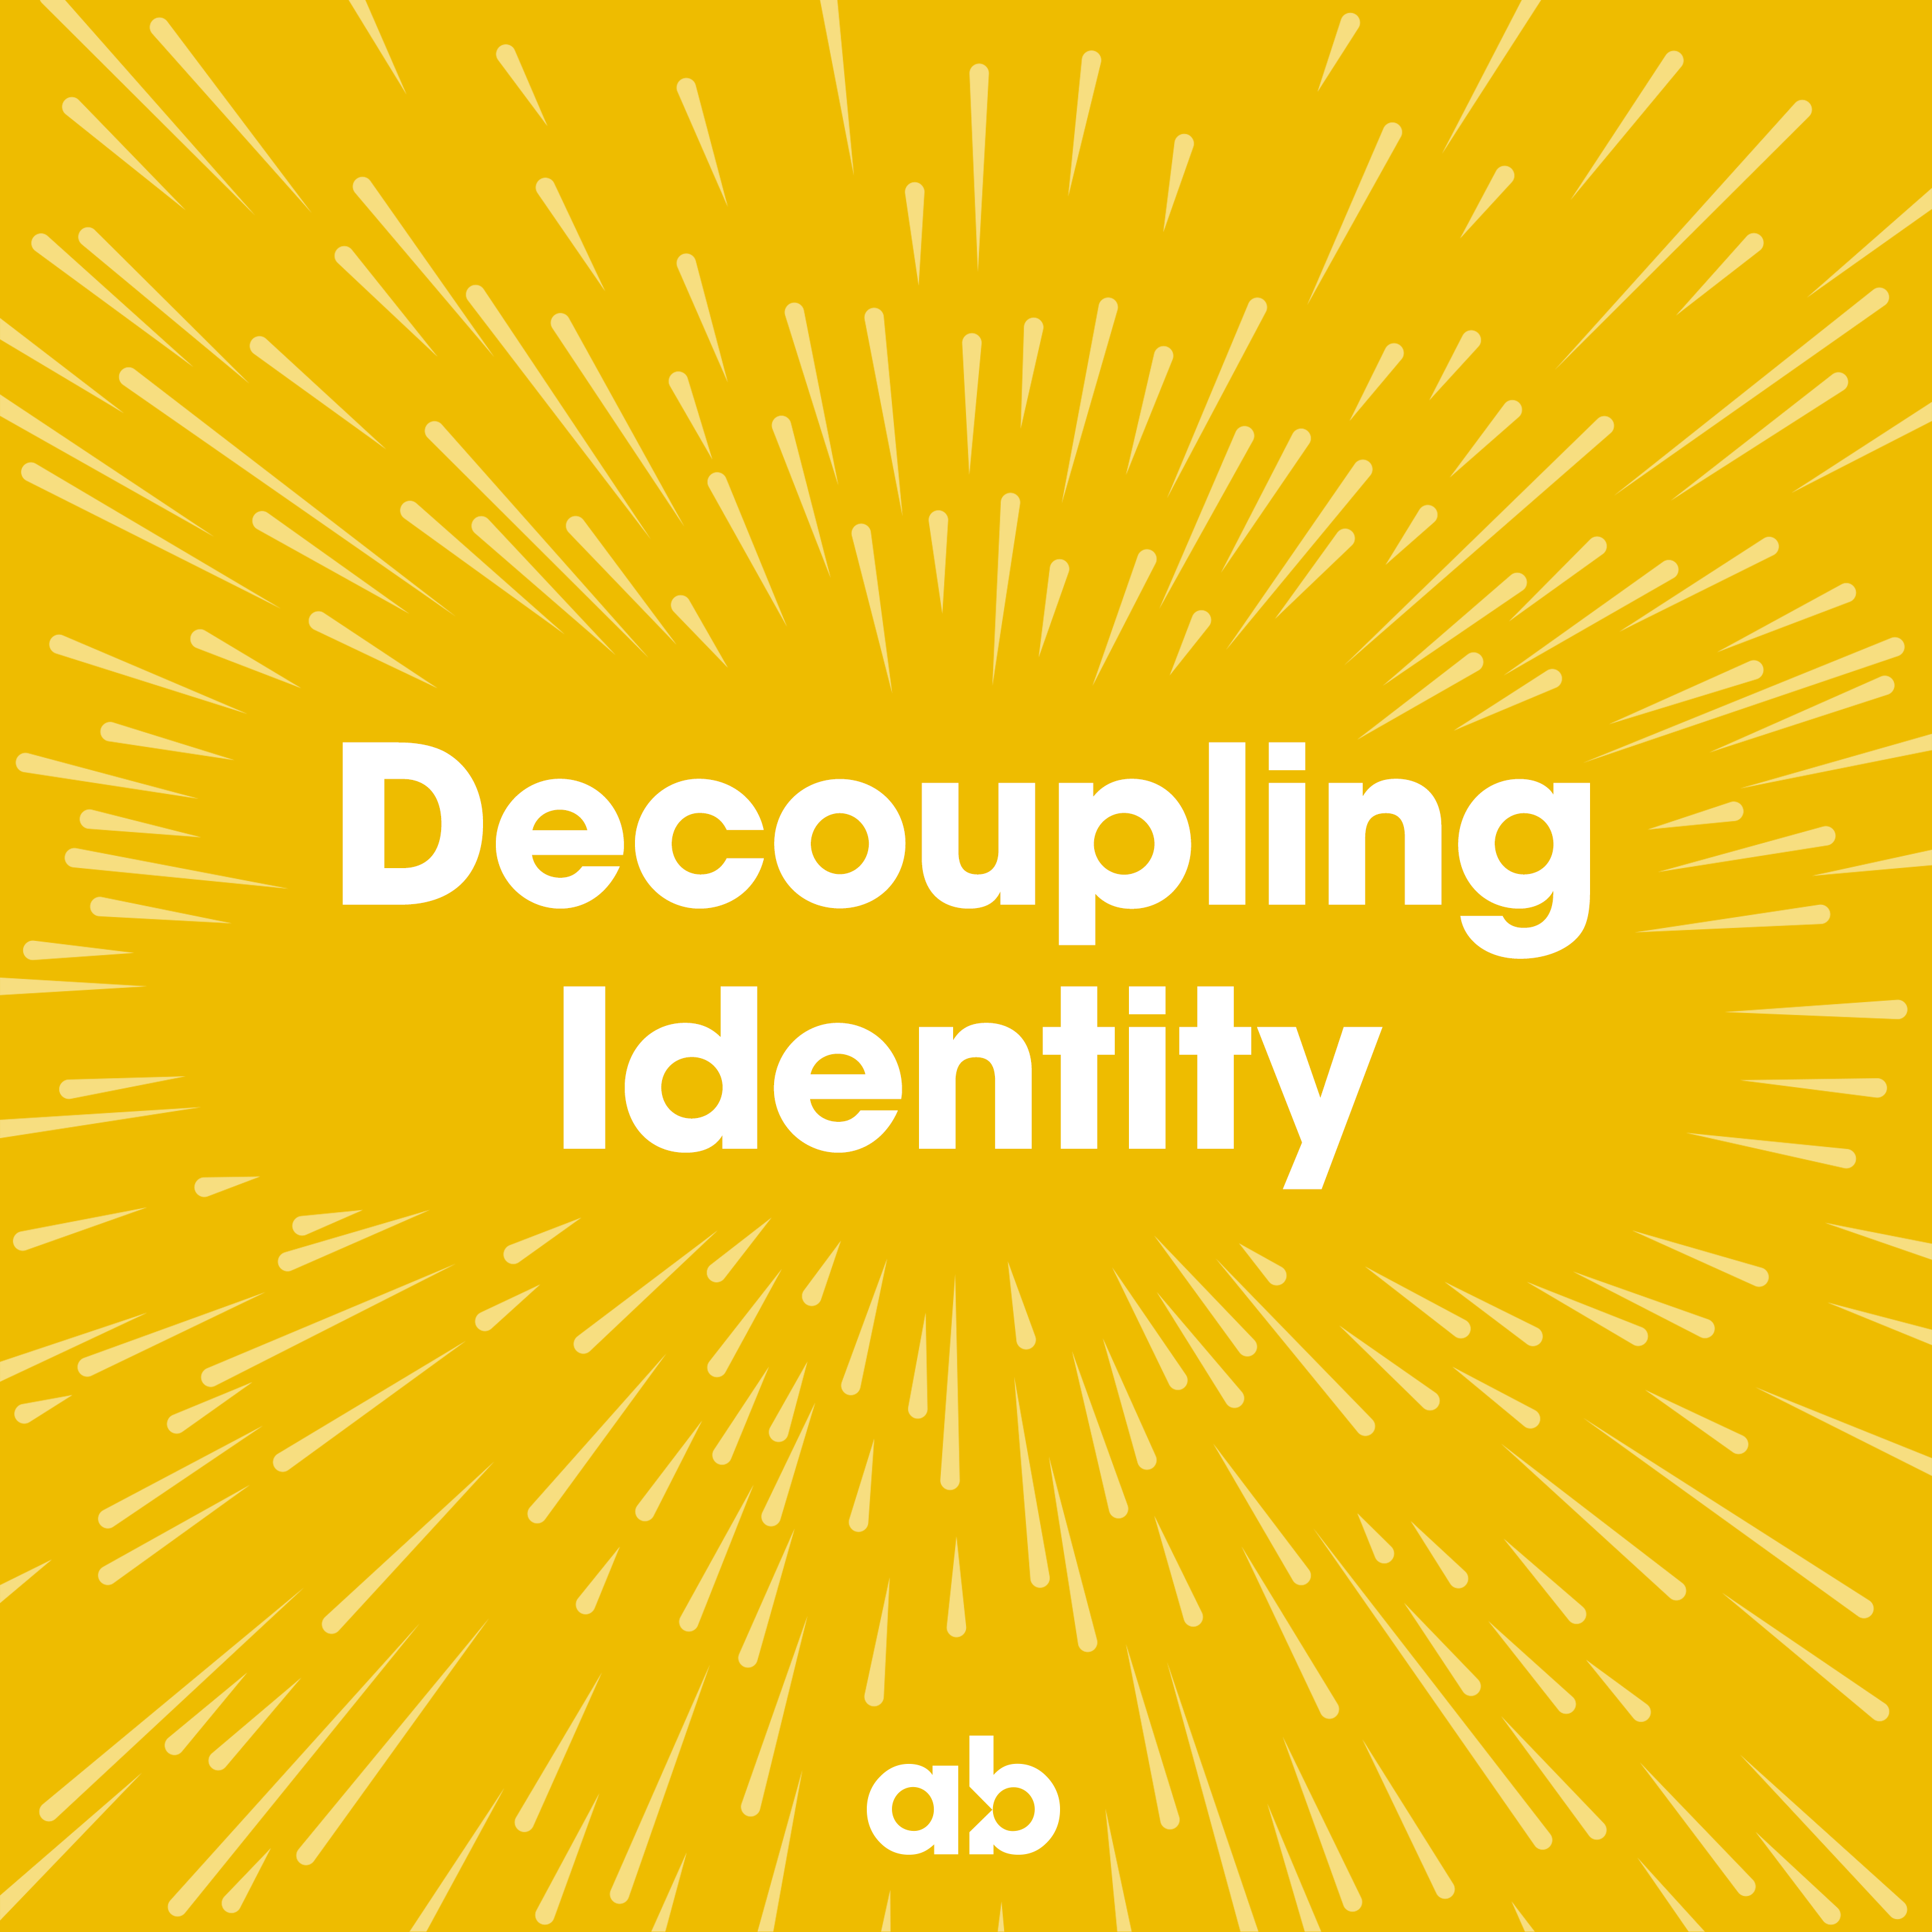 Achieve Breakthrough Podcast Ambition Unleashed Episode 6 From “preserving identity” to “decoupling identity” with Liberto Pereda, hosted by Sara Moore and Wayne Alexander